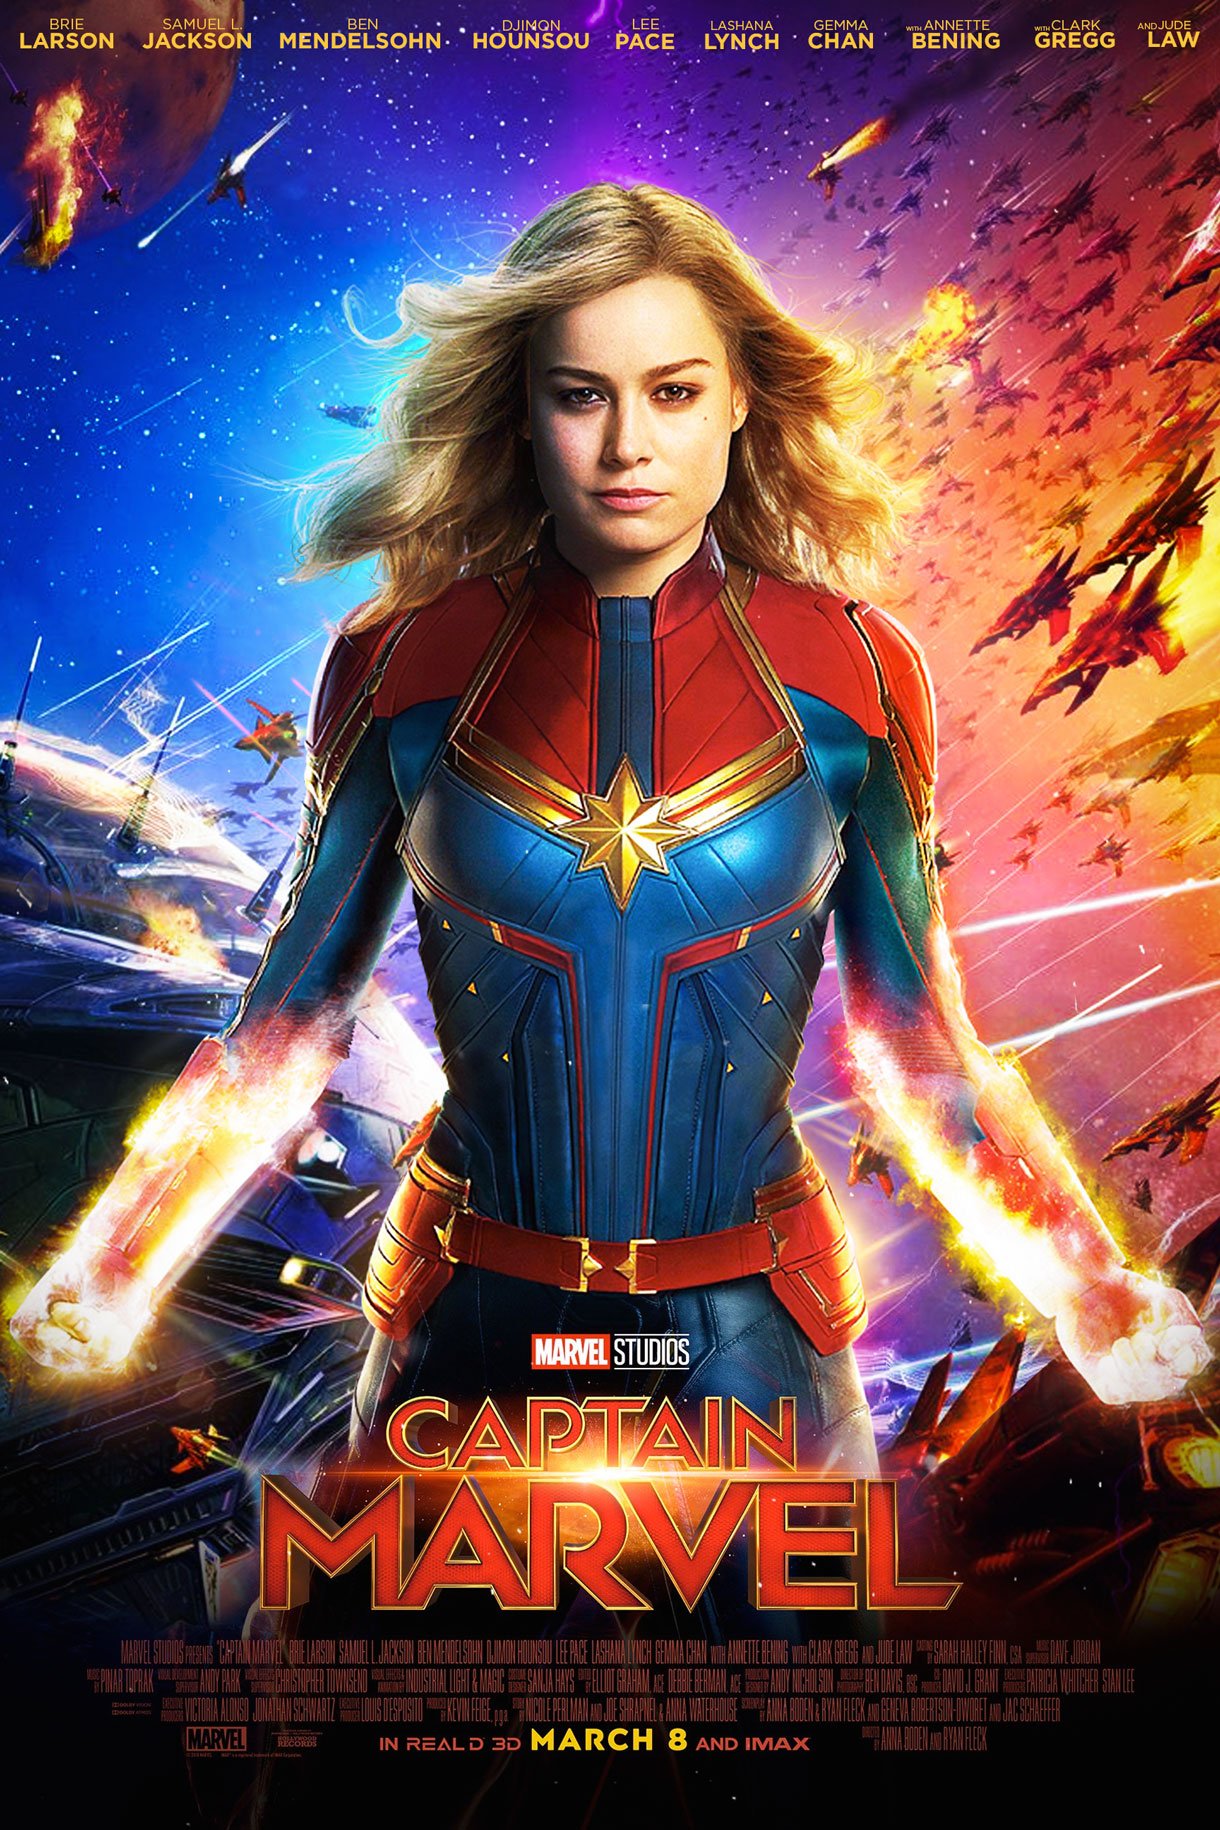 Captain Marvel Movie (2019) Wallpapers HD, Cast, Release